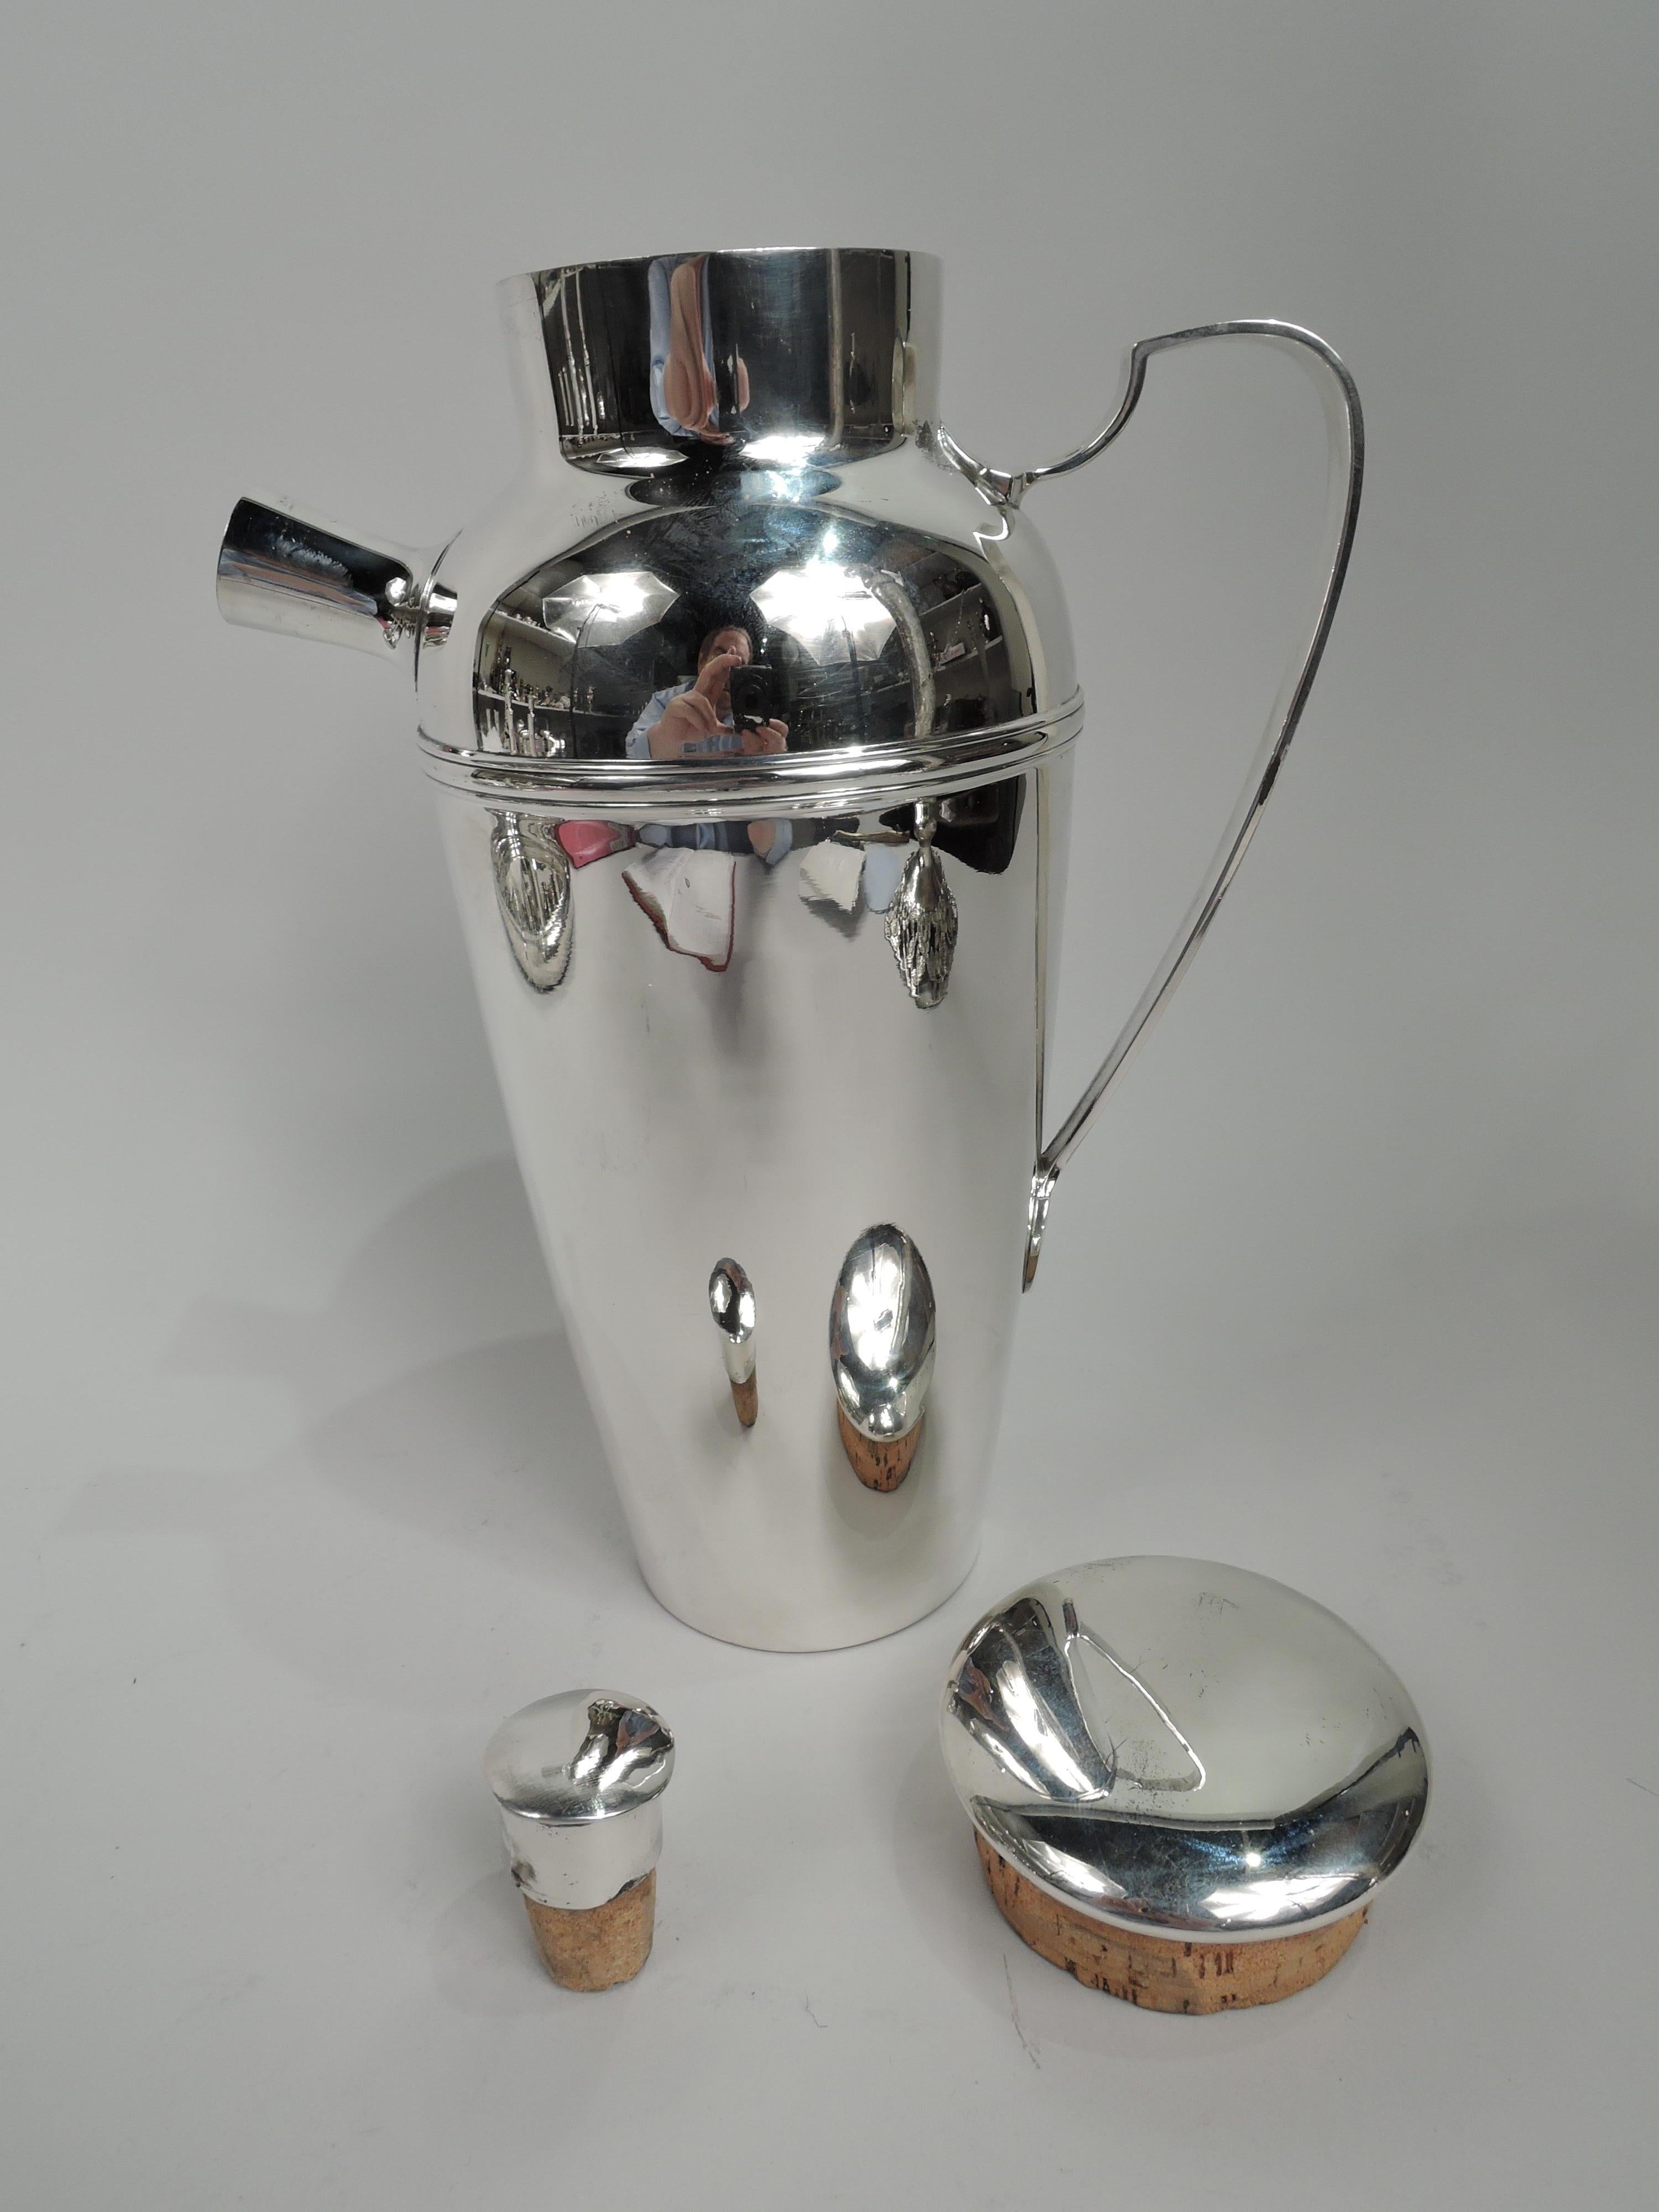 Art Deco sterling silver cocktail shaker. Made by Tiffany & Co. in New York, ca 1922. Tapering bowl, curved shoulder, scroll-bracket handle, and short inset neck. Cover has flattish and overhanging top with cork plug. Spout stubby and tapering with